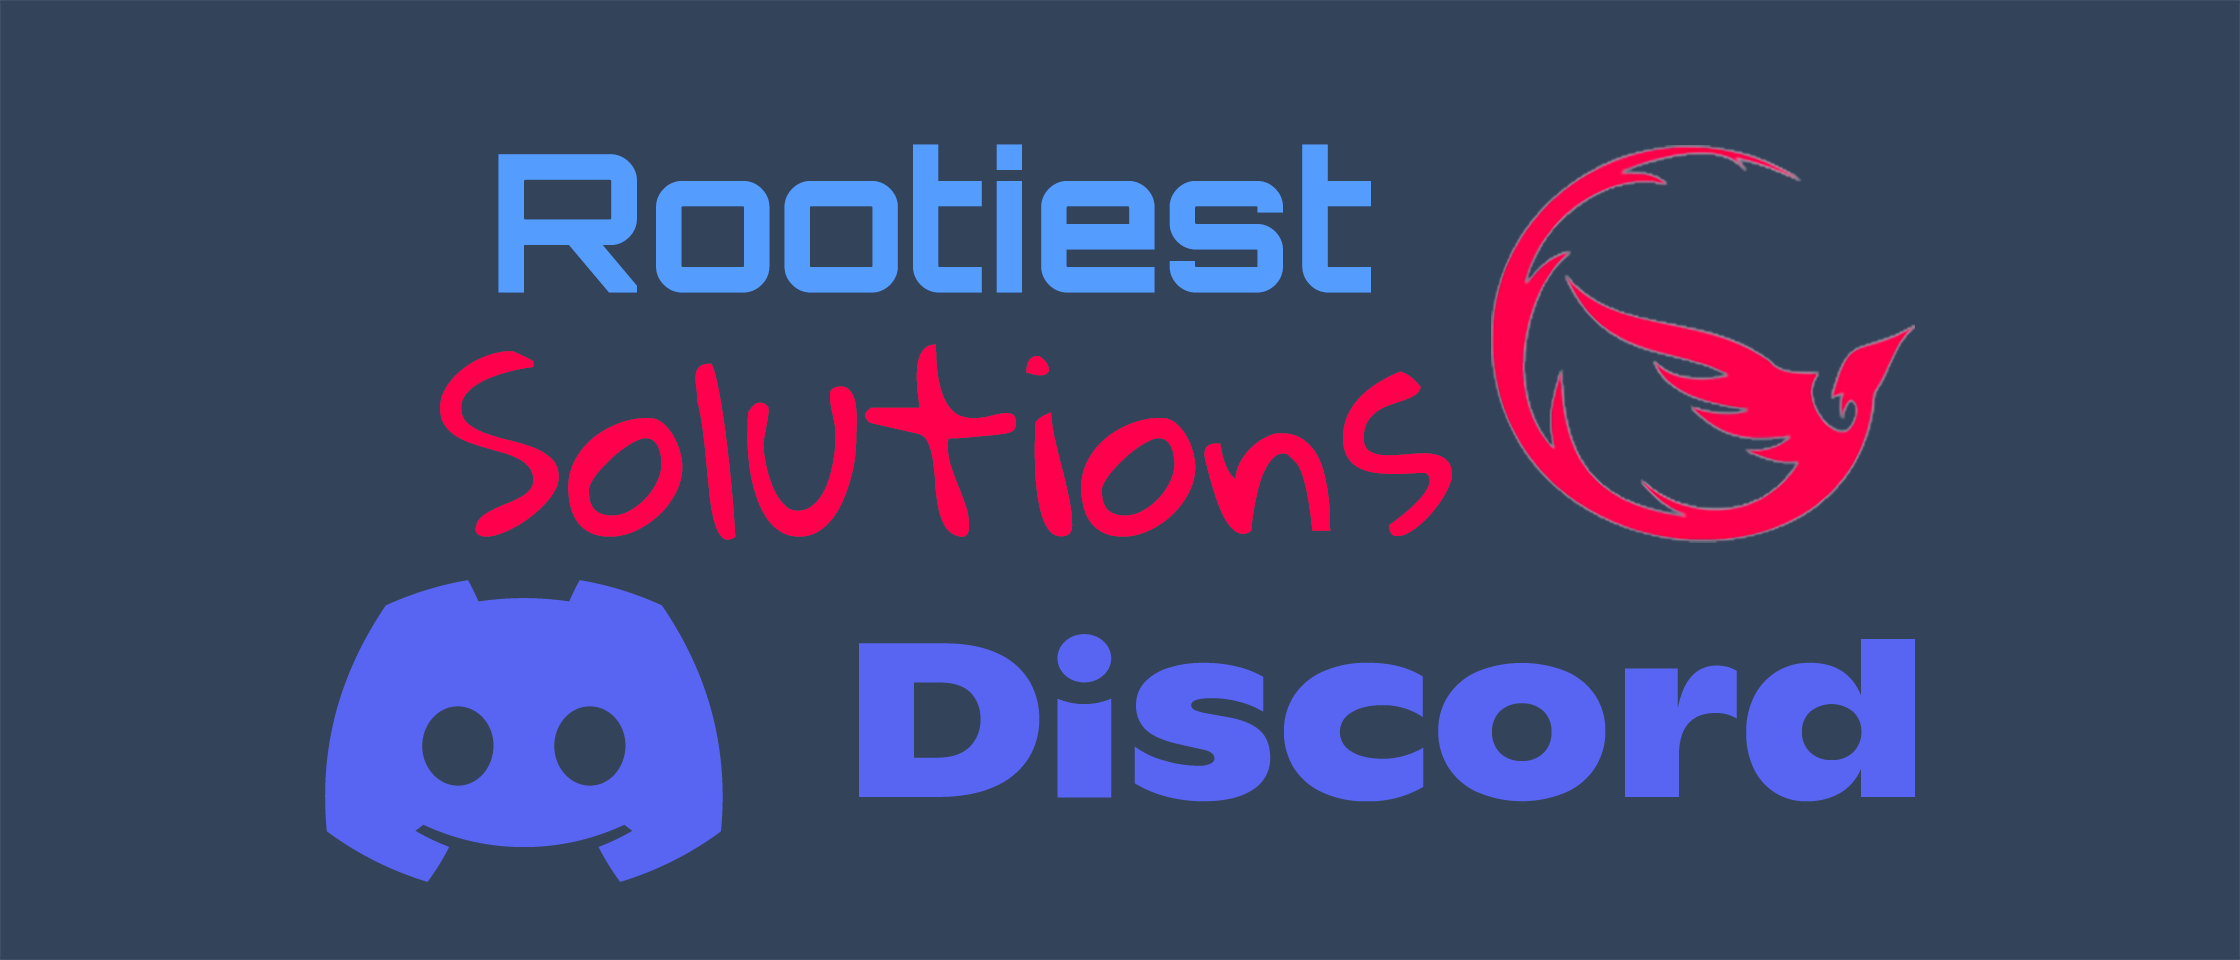 Rootiest Solutions on Discord